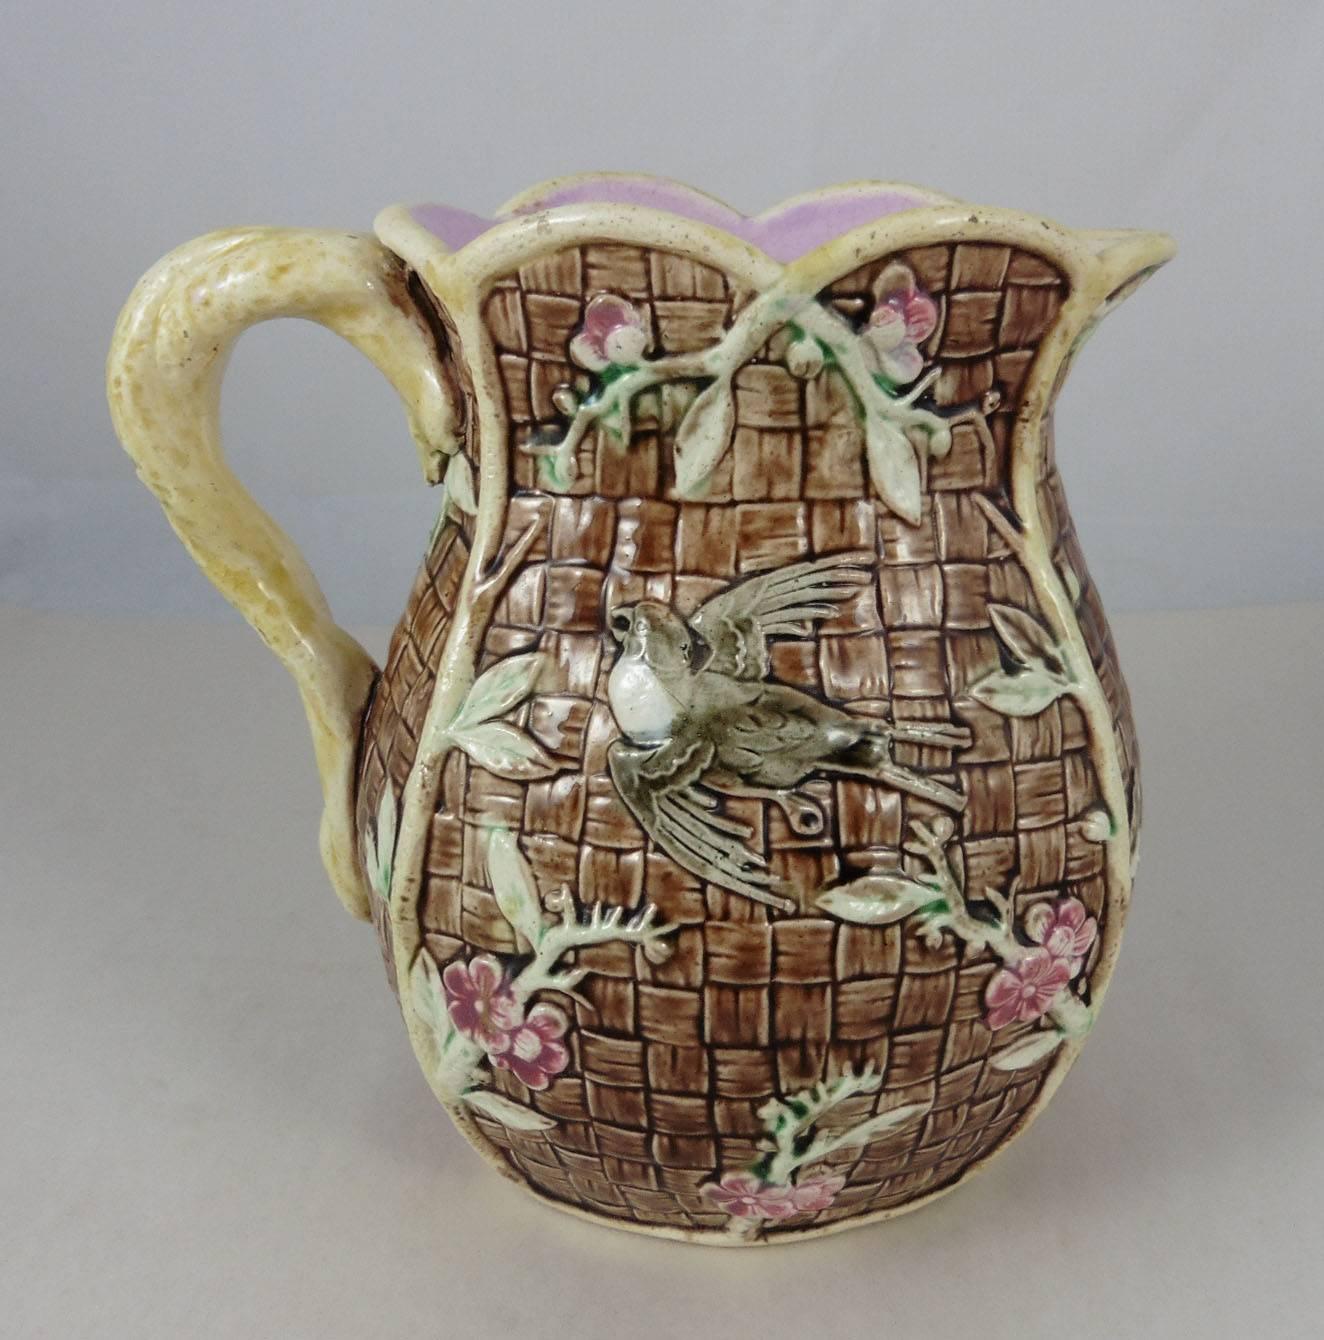 English 19th Majolica pitcher decorated with bird and pink flowers
on a brown basketweave.
A larger pitcher is available (H / 7.5